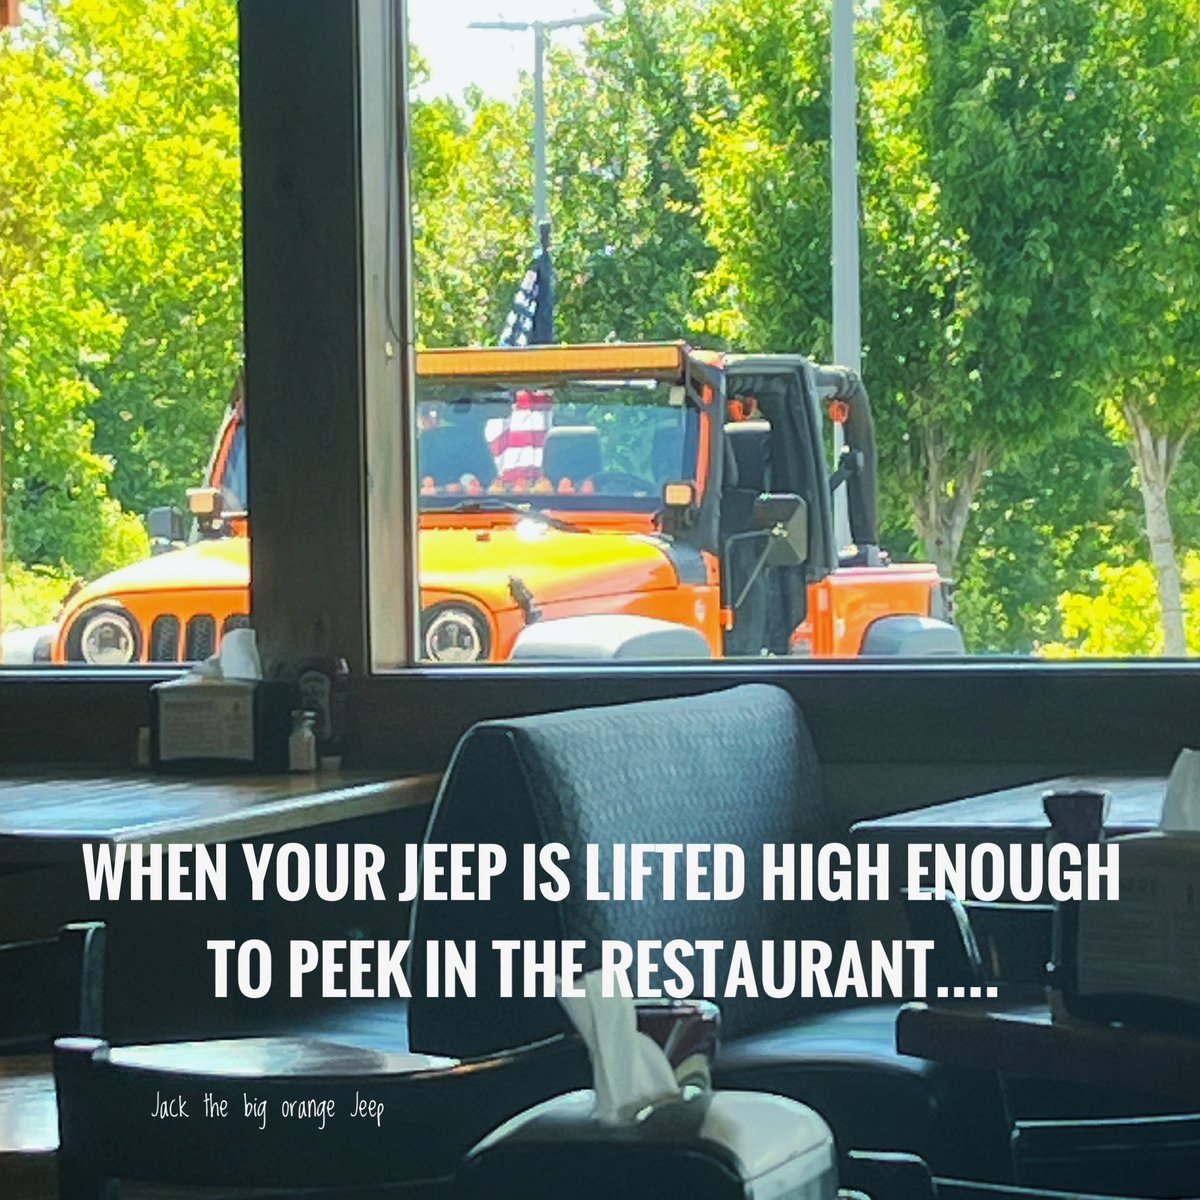 Poor Jack....left outside and trying to see where I am. He doesn't like being very far away from me...or...is it the other way around?
Happy Saturday Jeep Family!

#Jeeplove #jeeplife #jeep #jeepwrangler #jeepbeef #jackthebigorangejeep